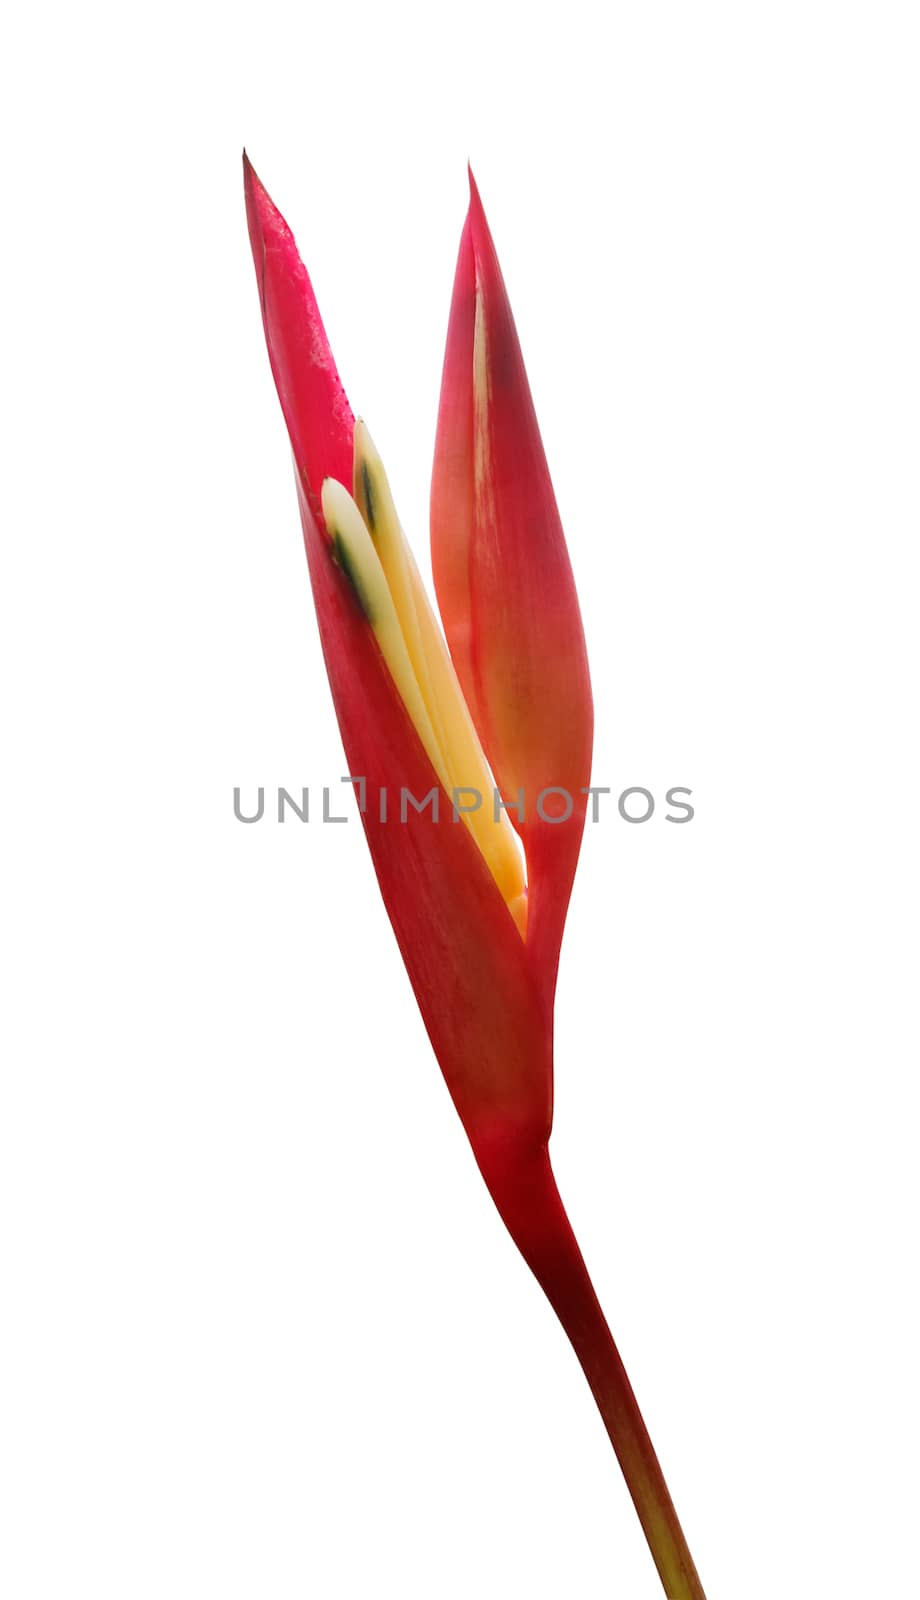 heliconia flower on white background by vitawin